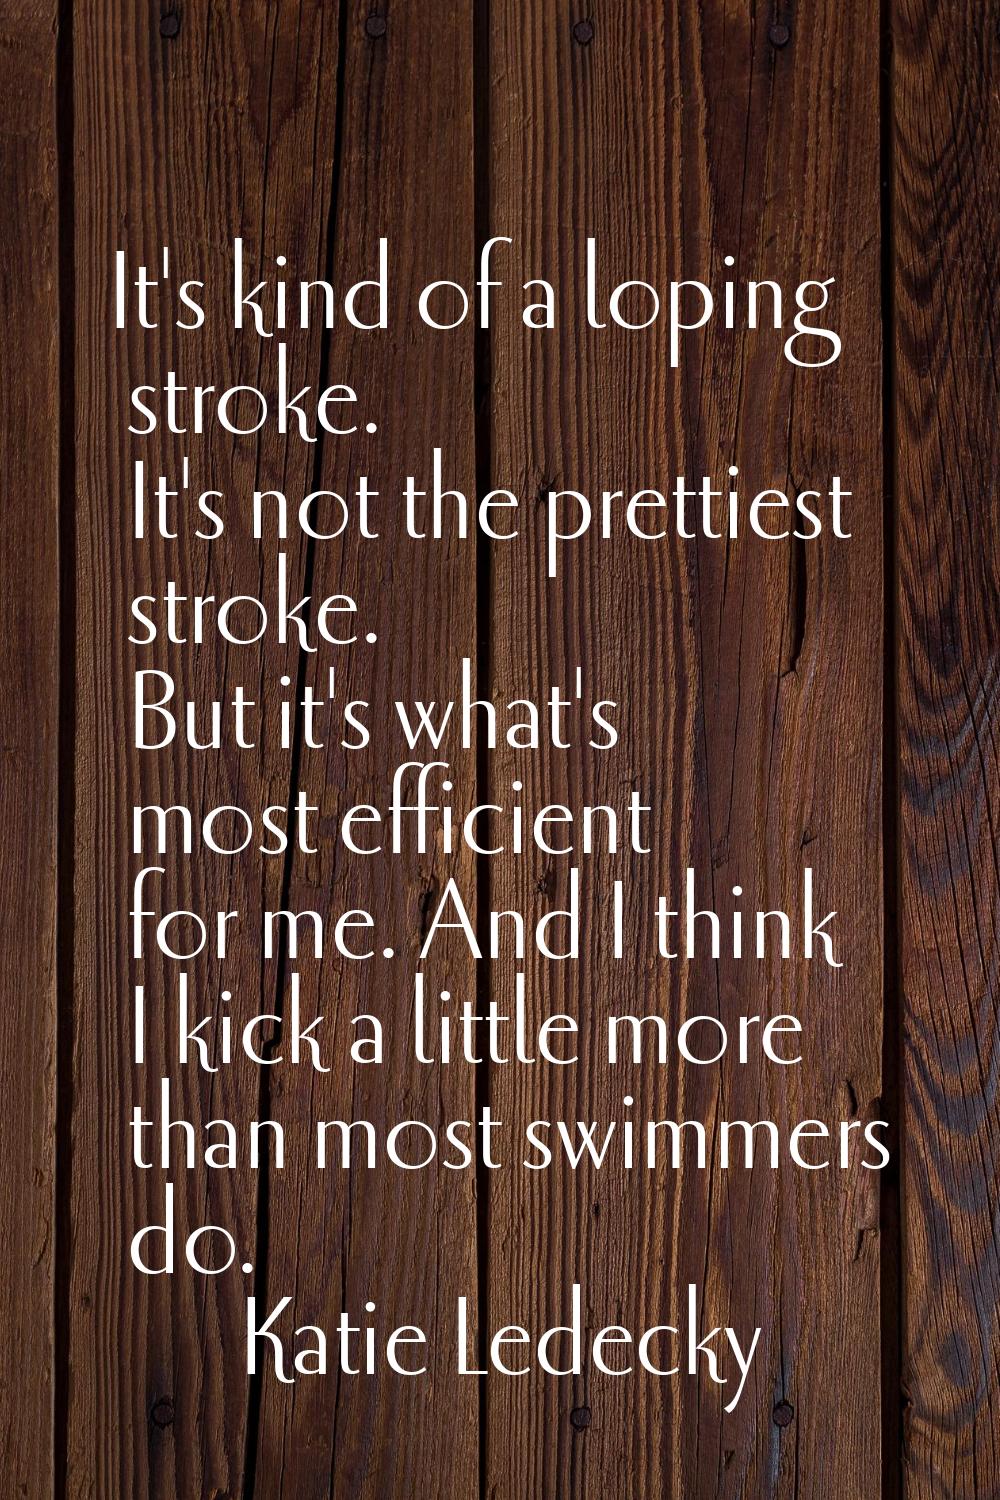 It's kind of a loping stroke. It's not the prettiest stroke. But it's what's most efficient for me.